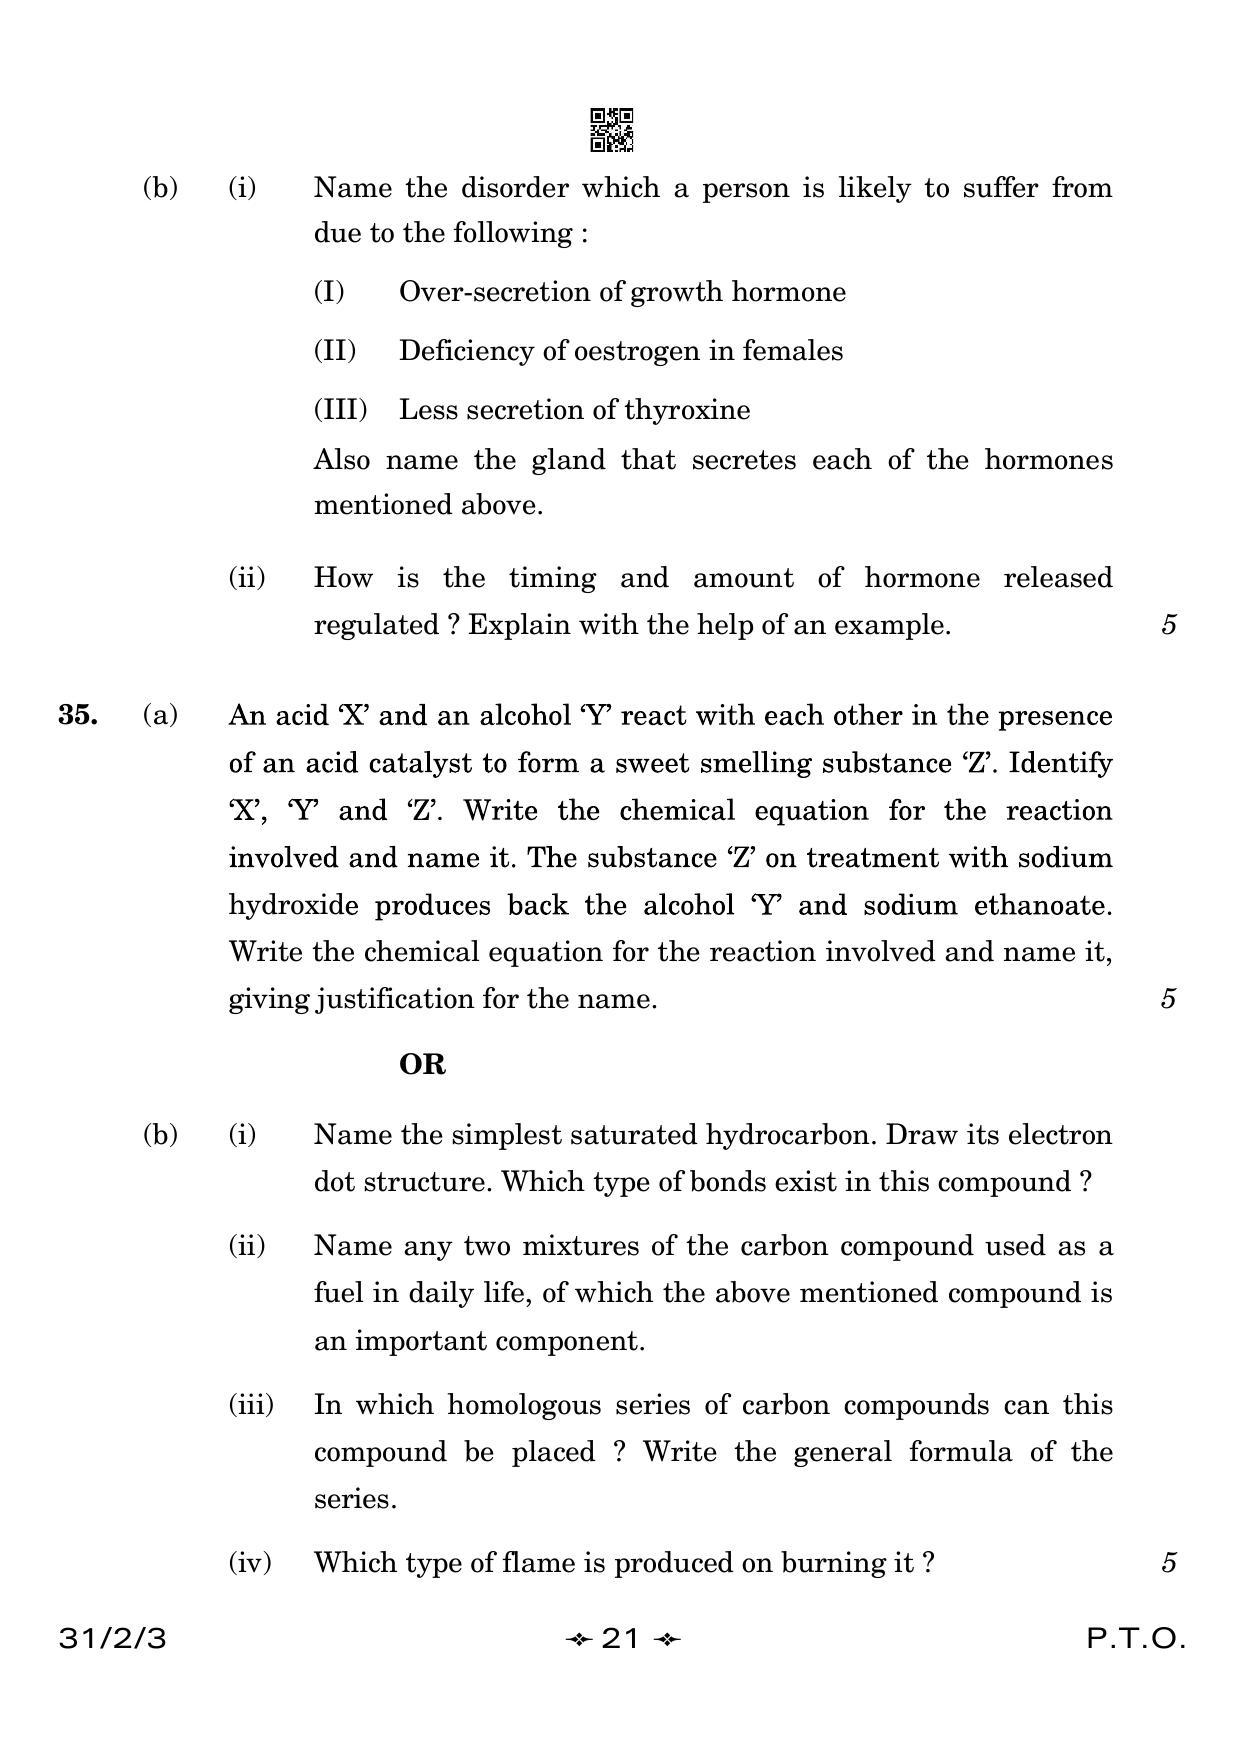 CBSE Class 10 31-2-3 Science 2023 Question Paper - Page 21